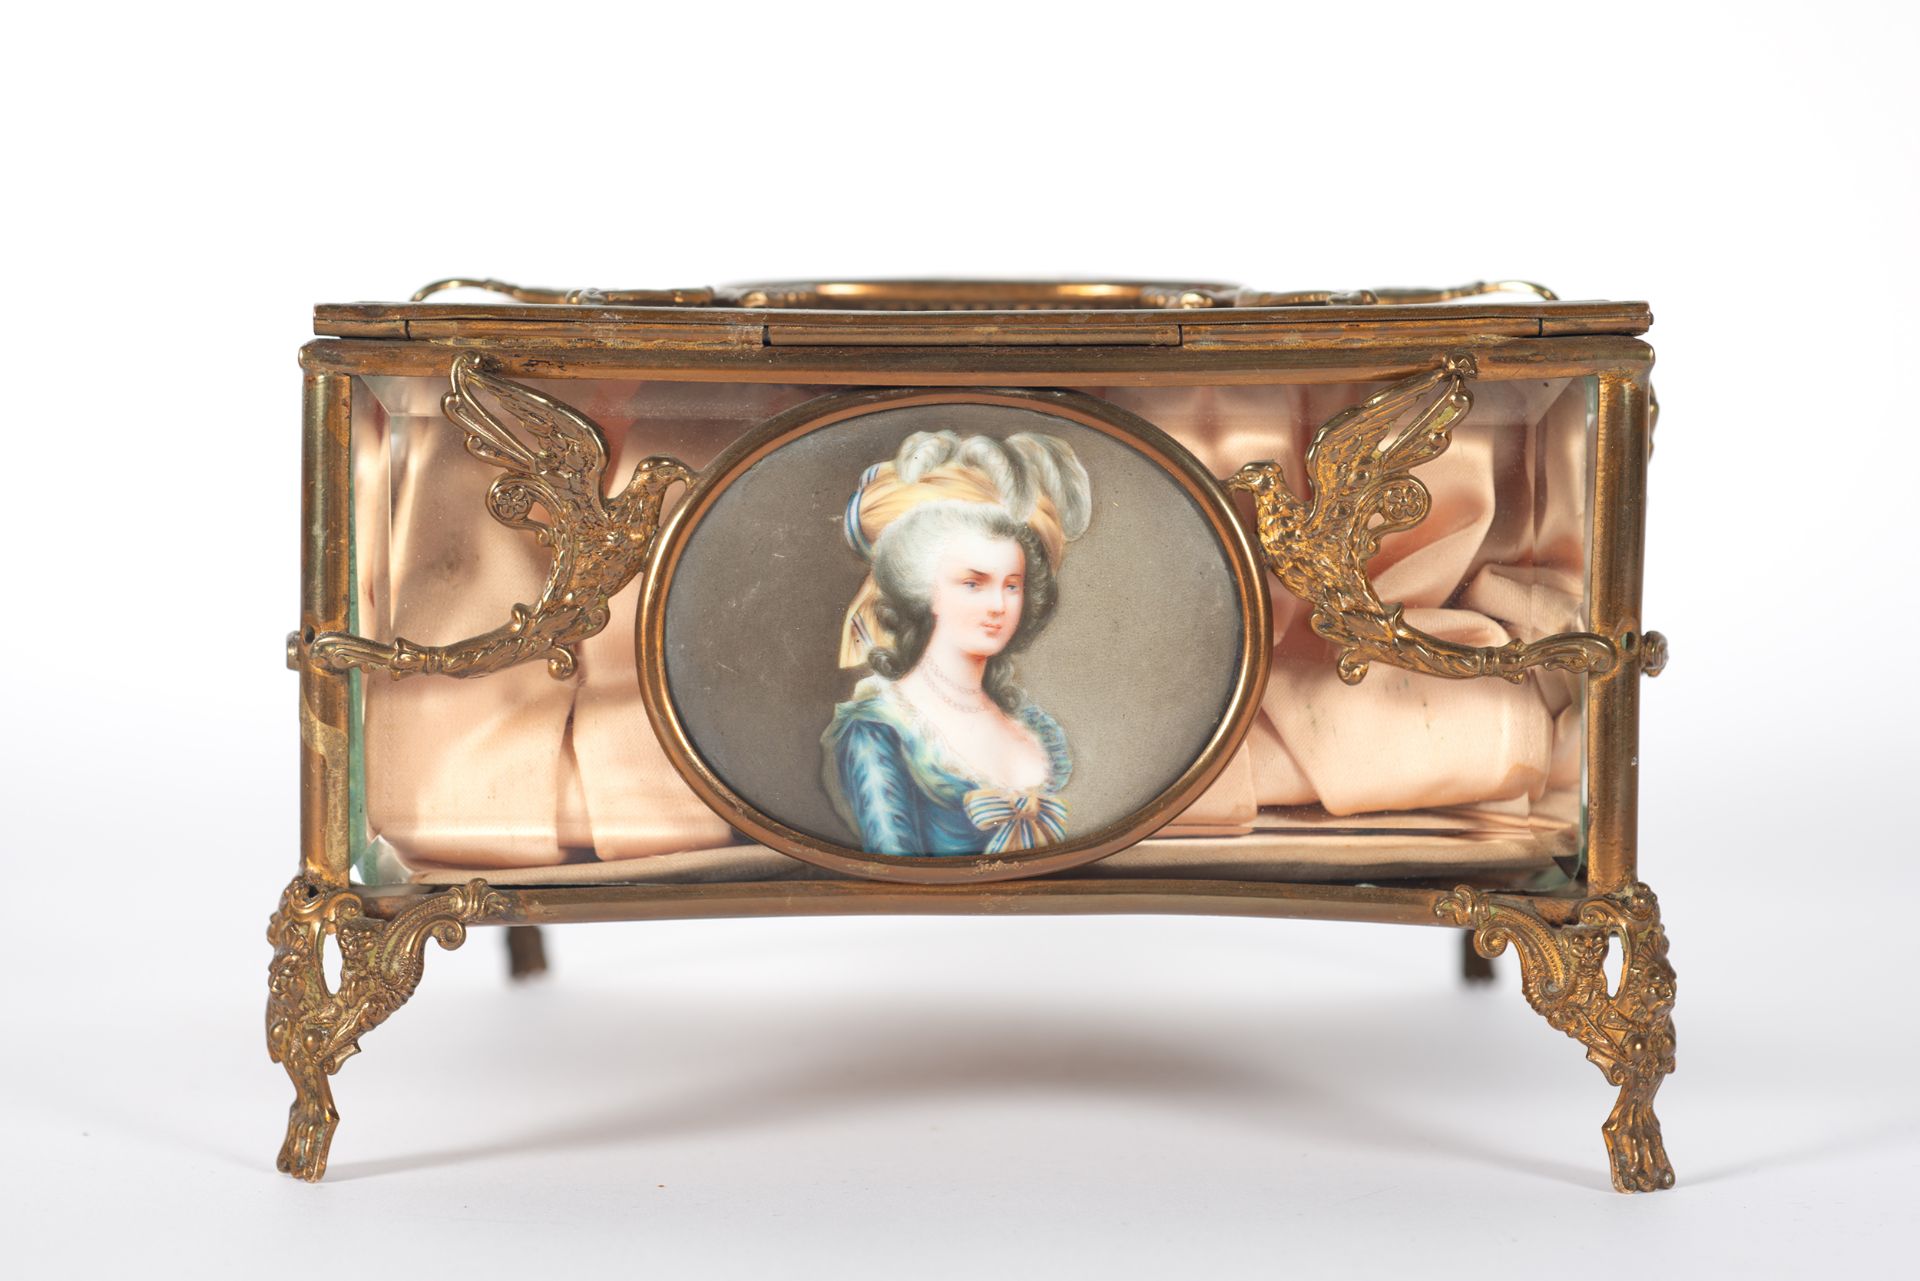 French bronze and enamel jewelry box, 19th century - Image 4 of 7